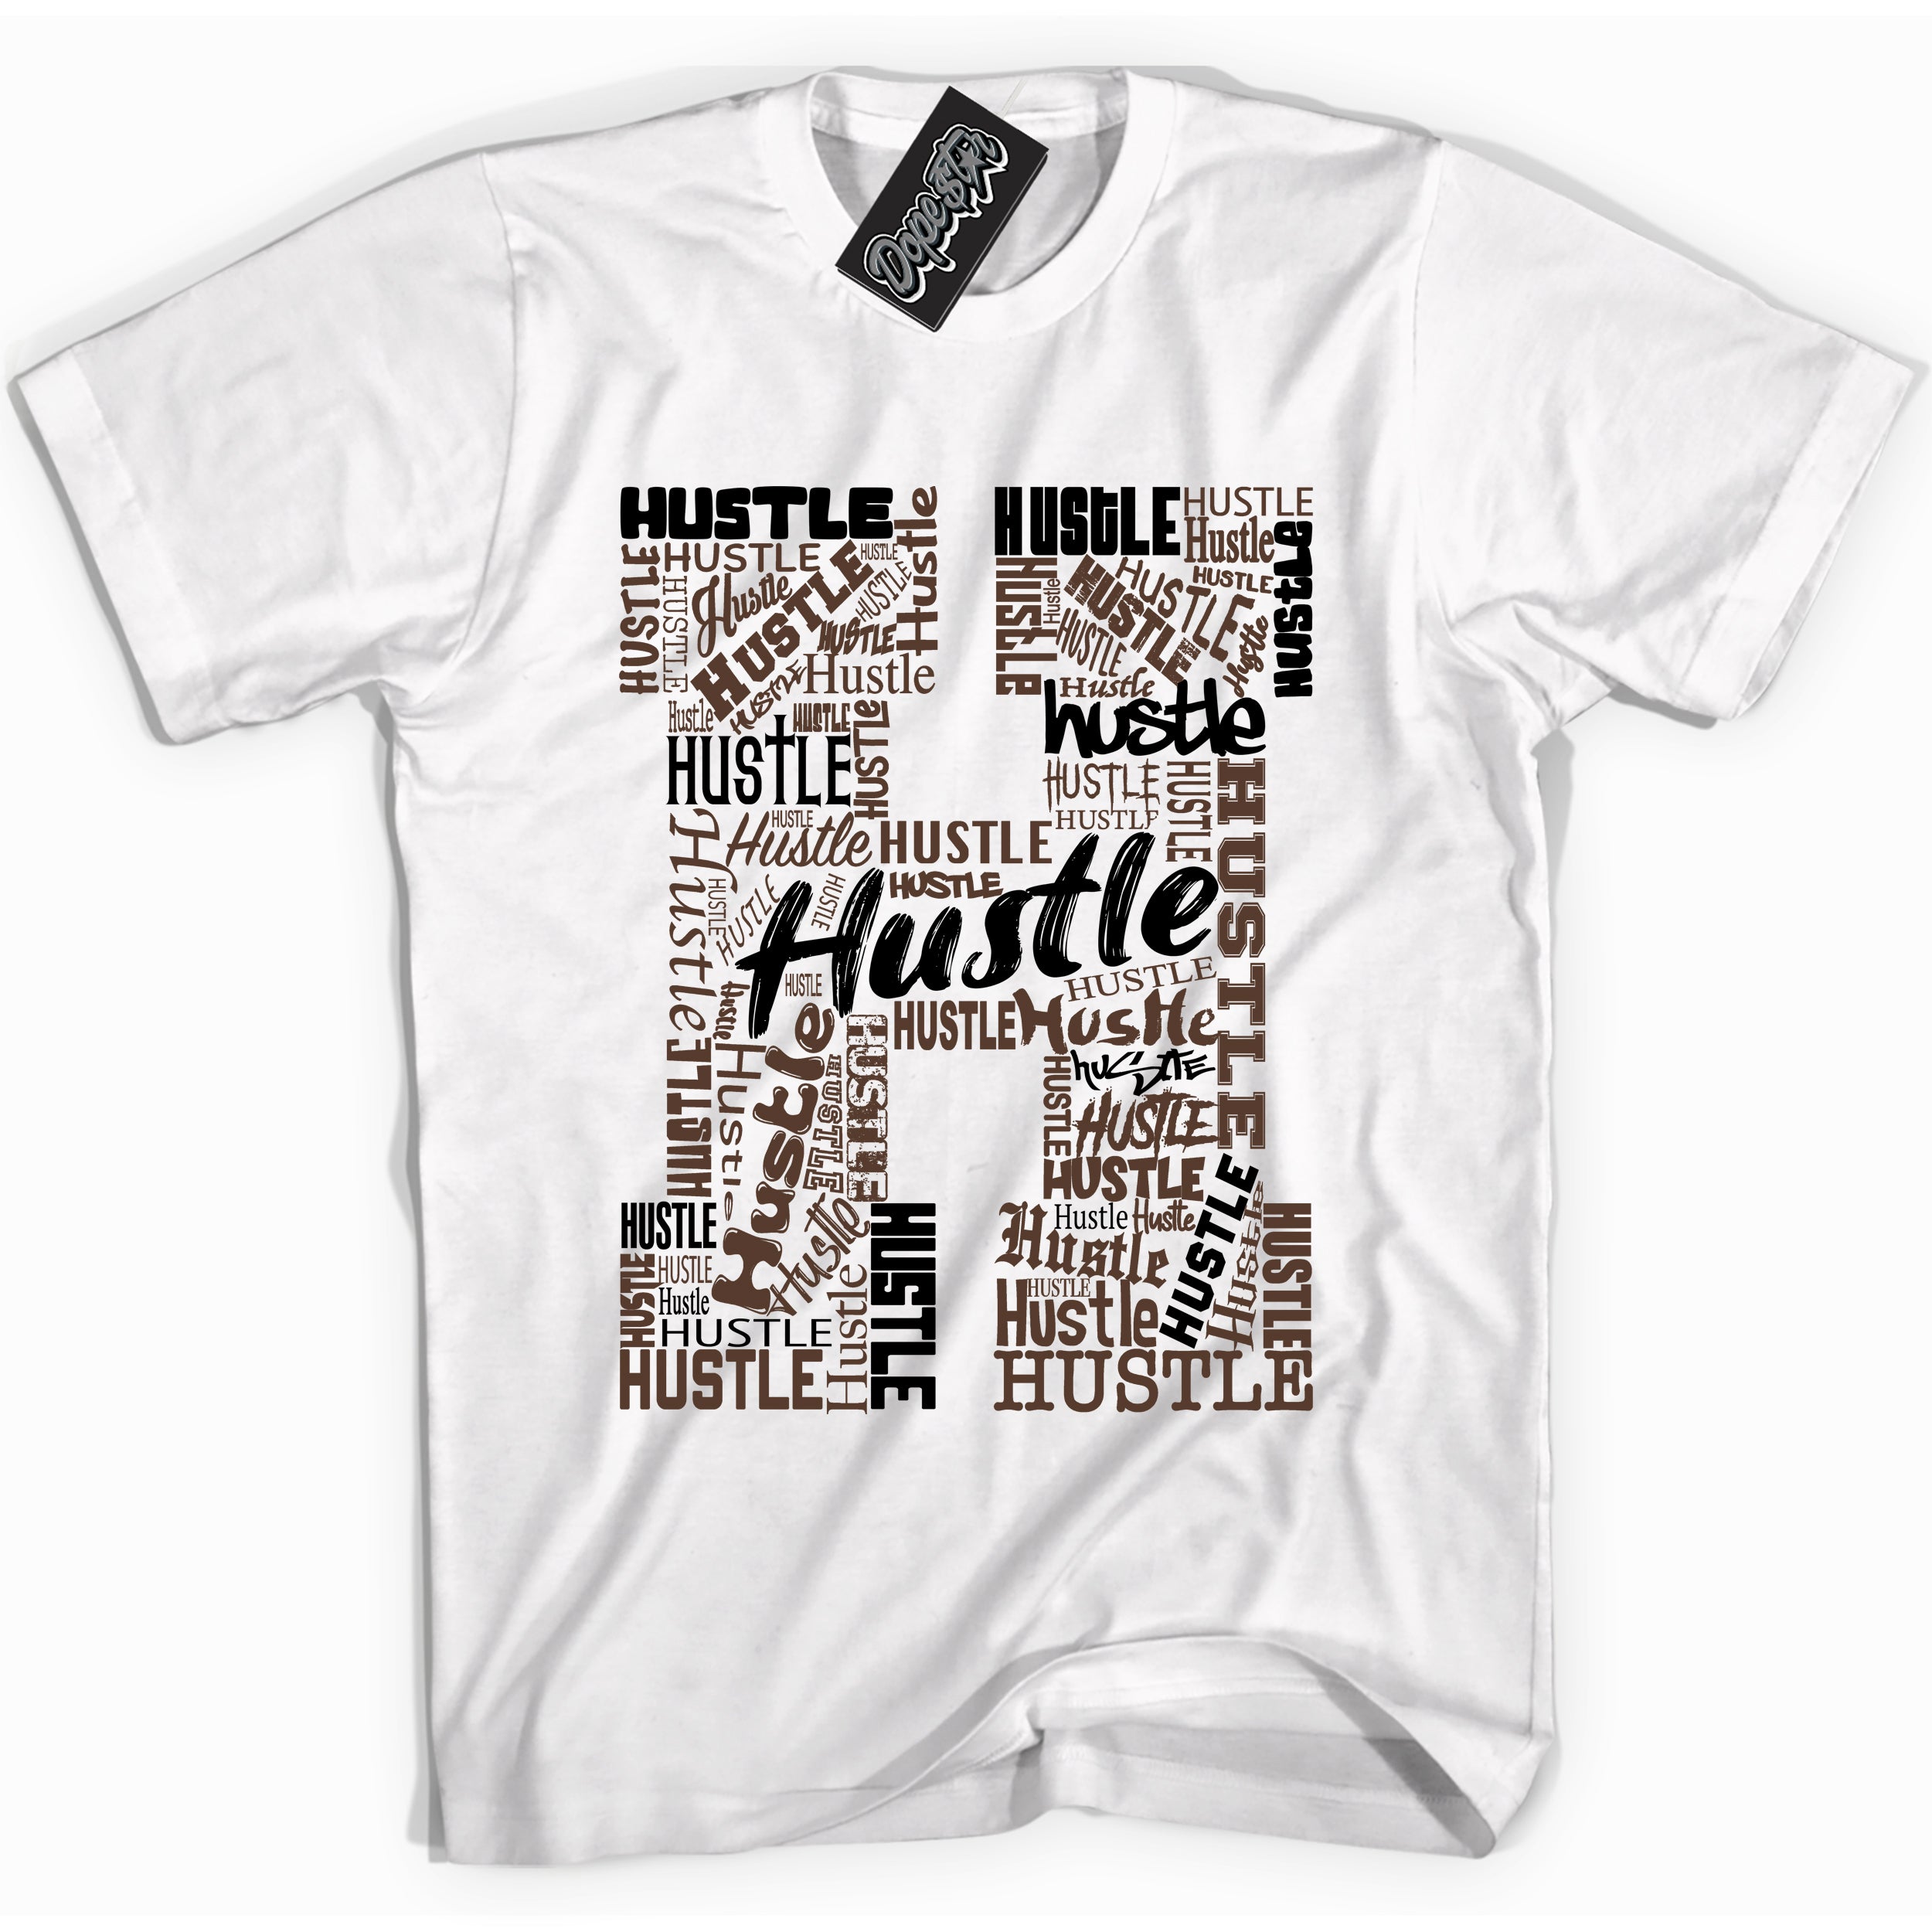 Cool White graphic tee with “ Hustle H ” design, that perfectly matches Palomino 1s sneakers 